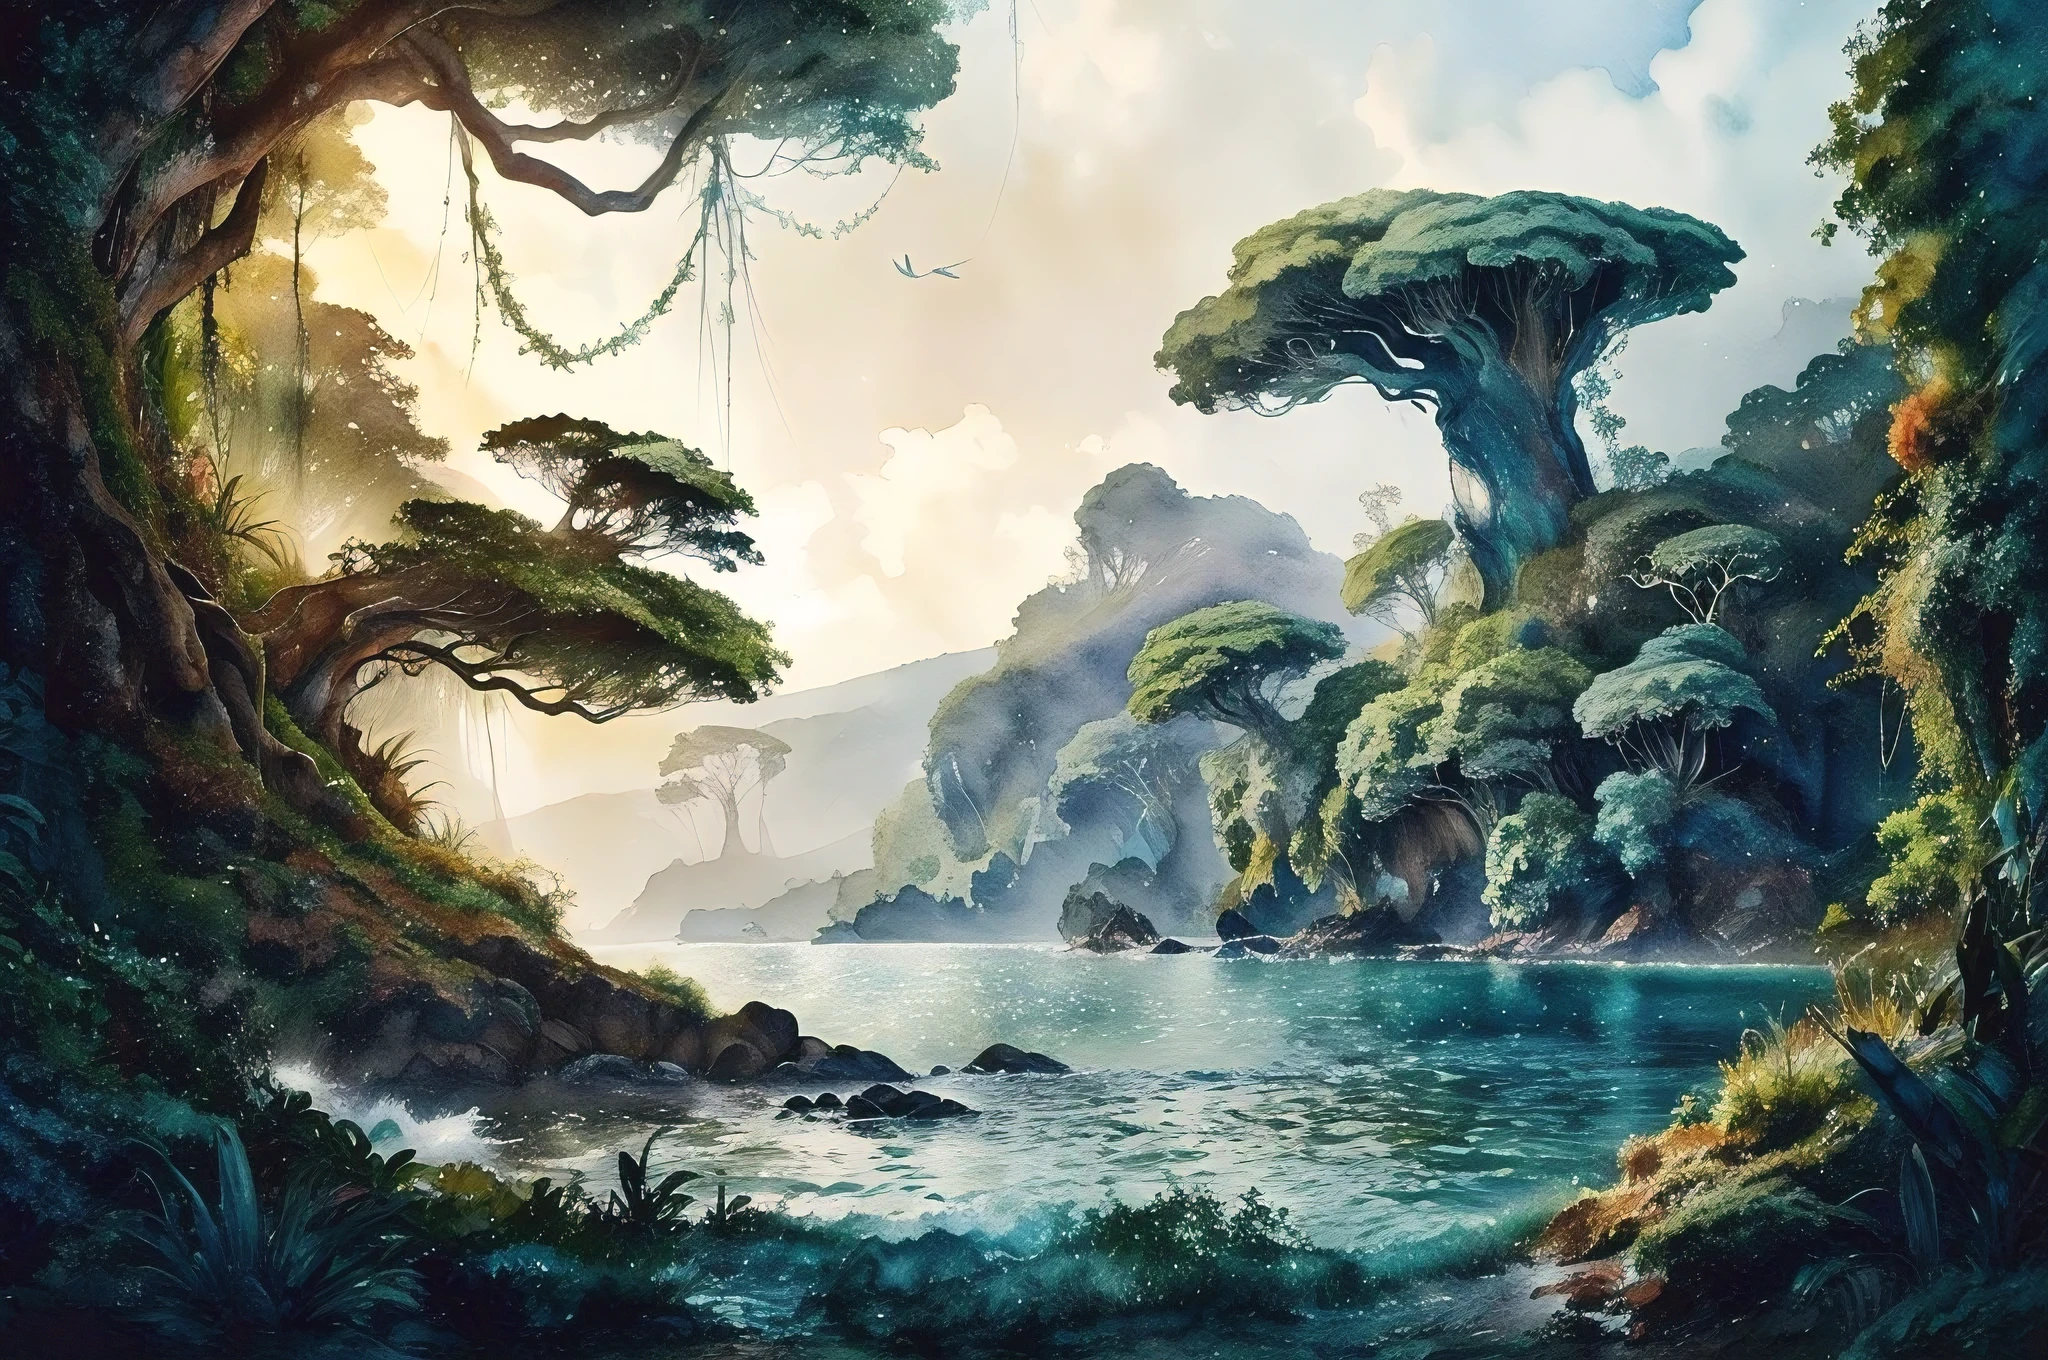 A mesmerizing watercolor painting capturing the enchanting seaside landscape of Pandora from the Avatar film series. The breathtaking scene features a magnificent coastal area, lush with vibrant, bioluminescent vegetation. Towering trees and unique flora create a sense of wonder and exploration. The natural light filters through the foliage, casting a soft, ethereal glow on the water, and creating a surreal atmosphere.